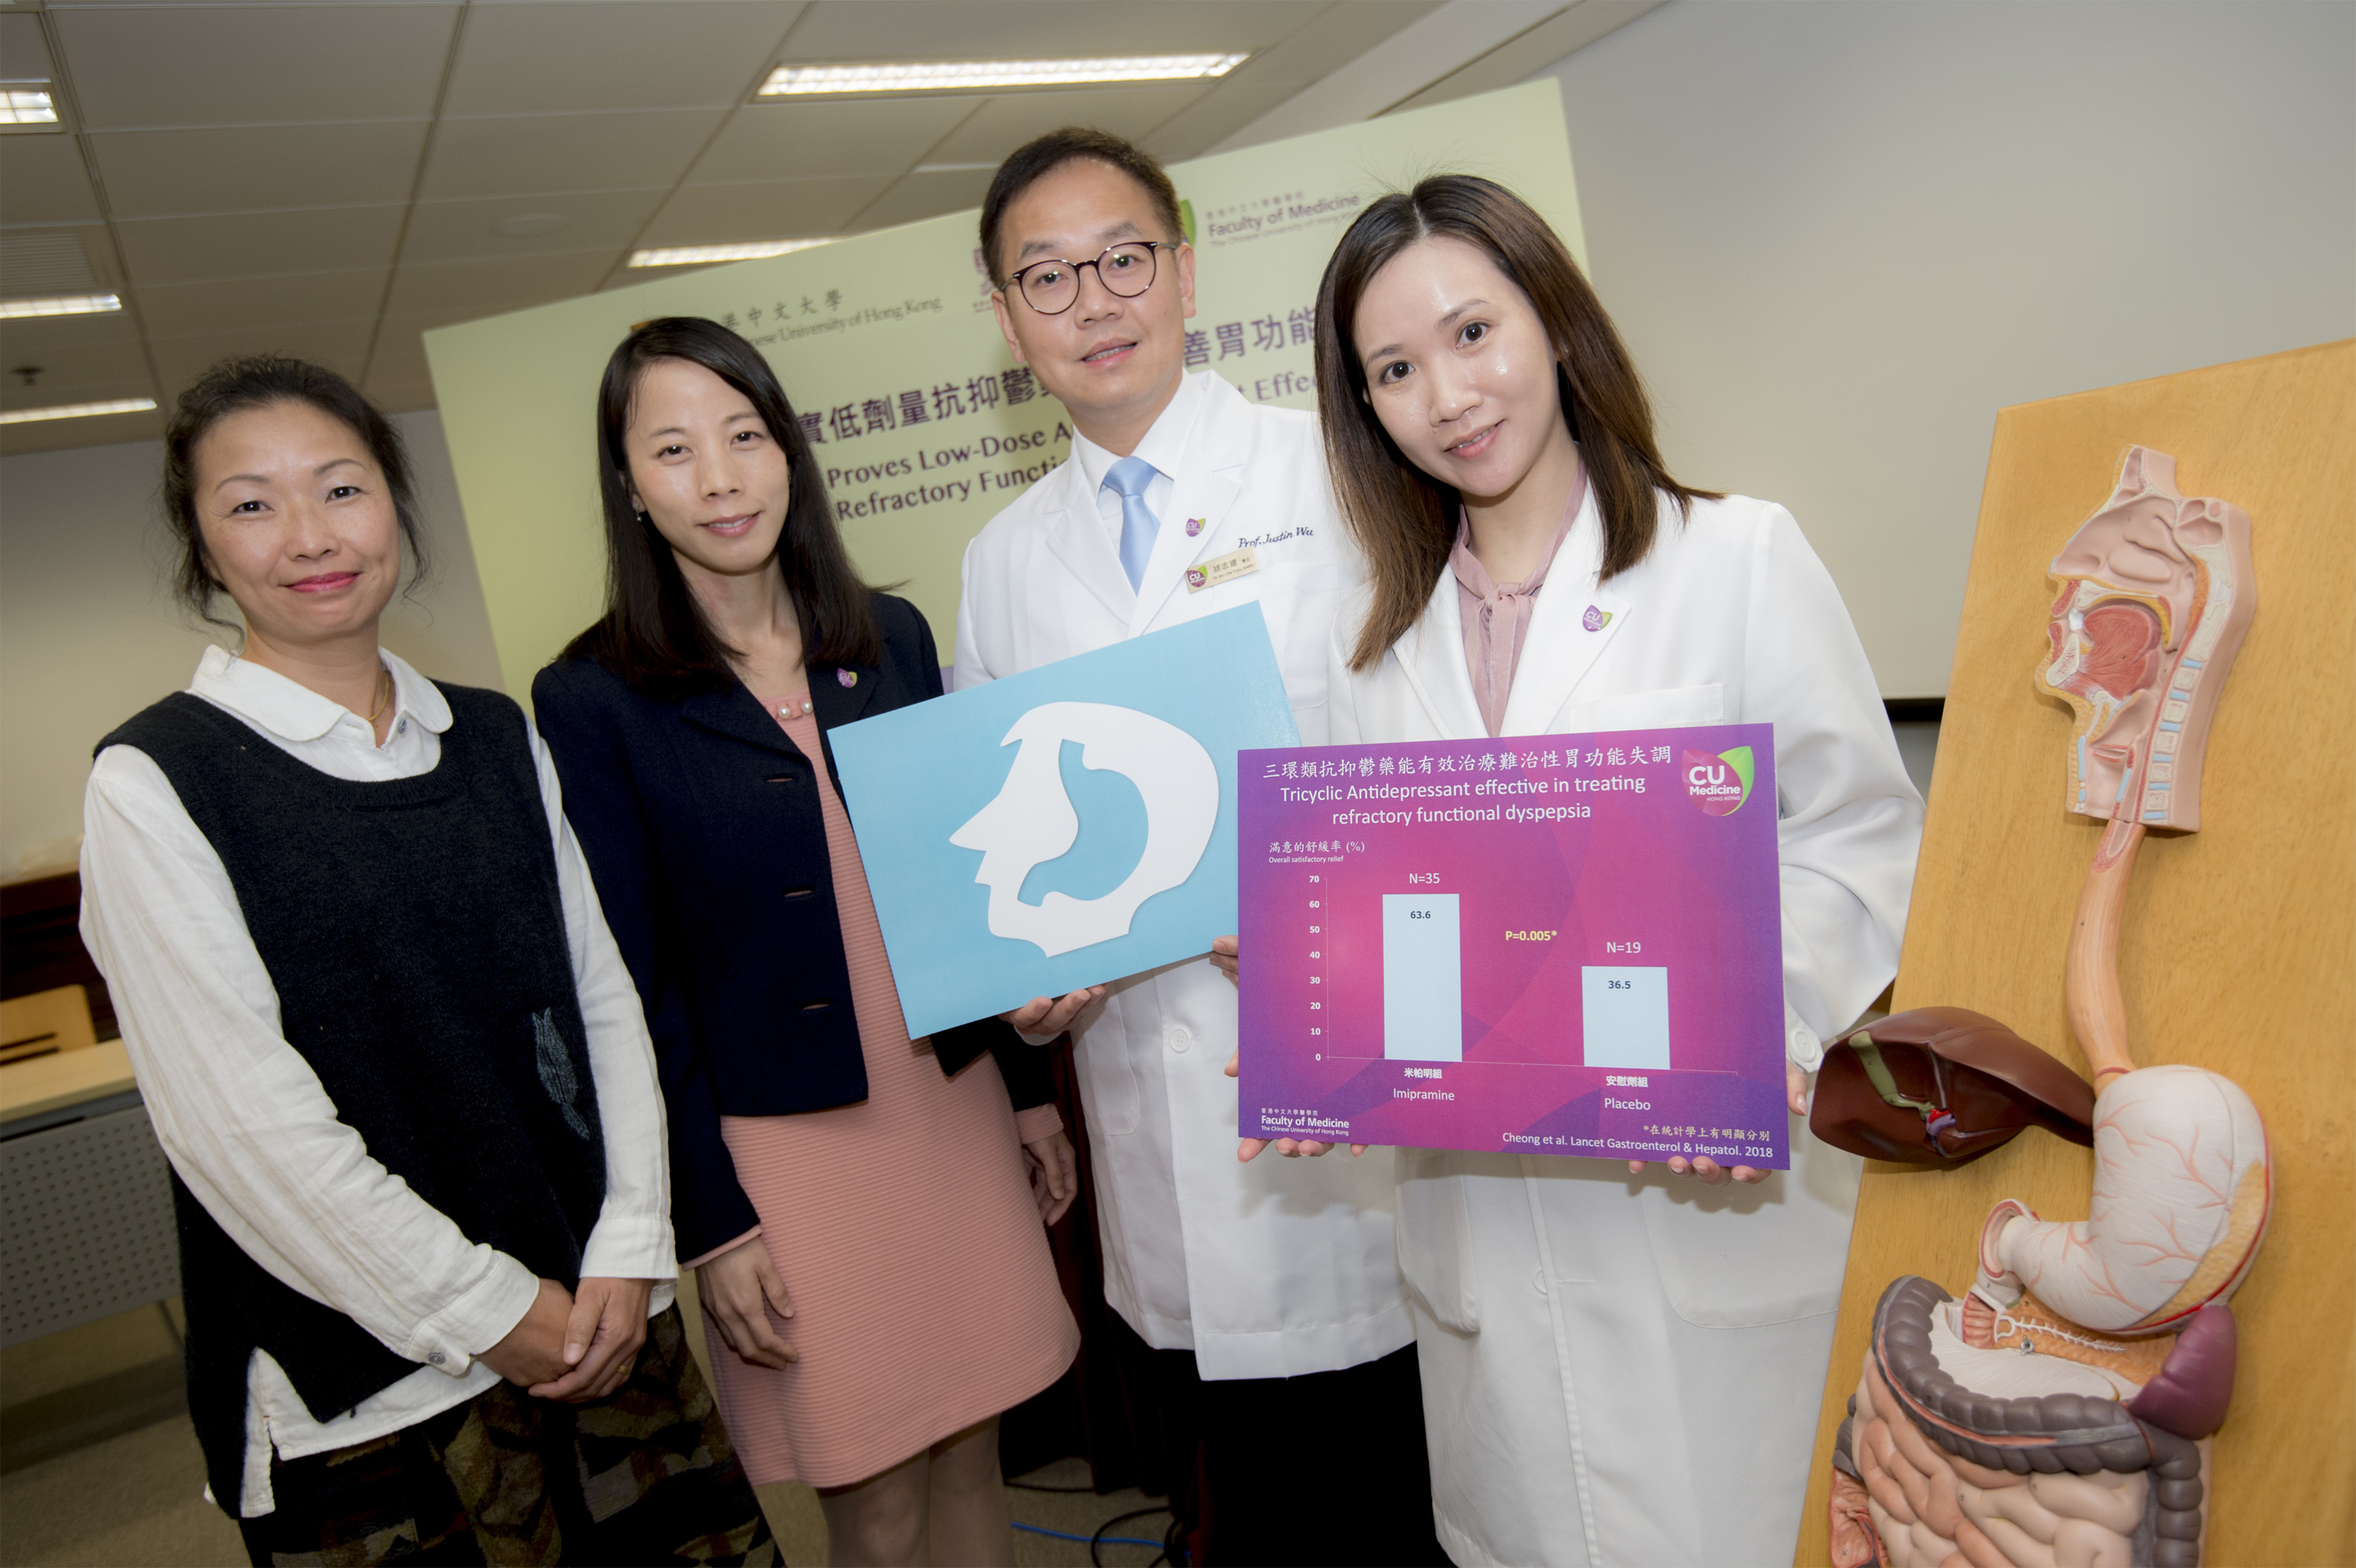 A recent study by the Faculty of Medicine of CUHK proved that low-dose imipramine, a tricyclic antidepressant (TCA), is efficacious for patients with refractory functional dyspepsia. (From left: Functional dyspepsia patient Ms. LEE; Ms. Yawen CHAN, Clinical Psychologist, Hong Kong Institute of Integrative Medicine, Faculty of Medicine; Professor Justin Che Yuen WU and Research Associate Ms. Pui Kuan CHEONG from the Division of Gastroenterology and Hepatology, Department of Medicine and Therapeutics, Faculty of Medicine, CUHK)